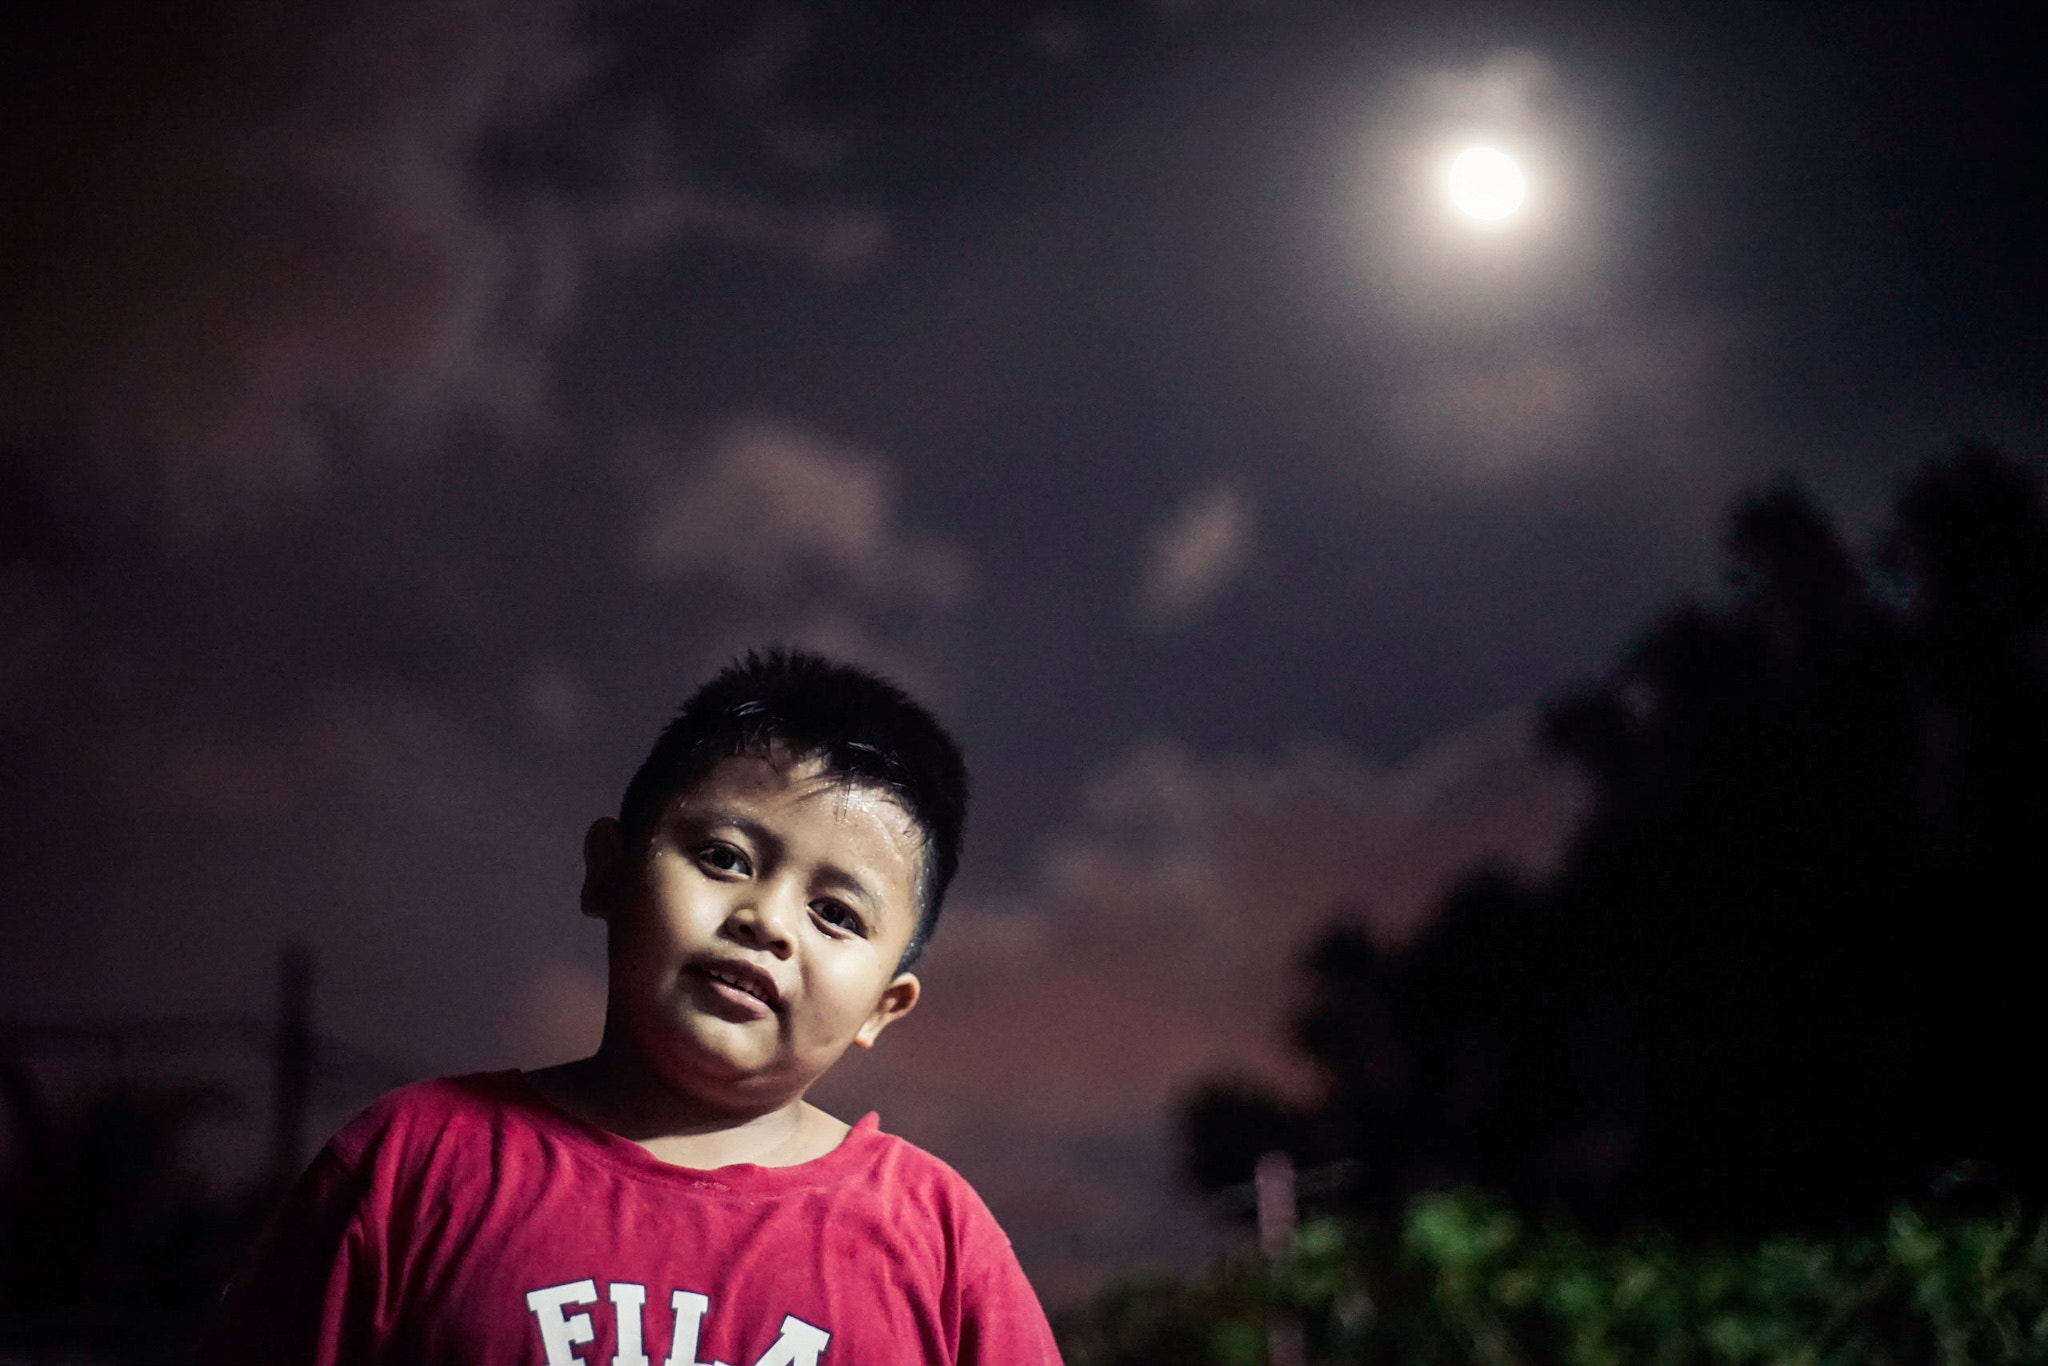 Sony a7 II sample photo. Playtime at night under the bright moon photography